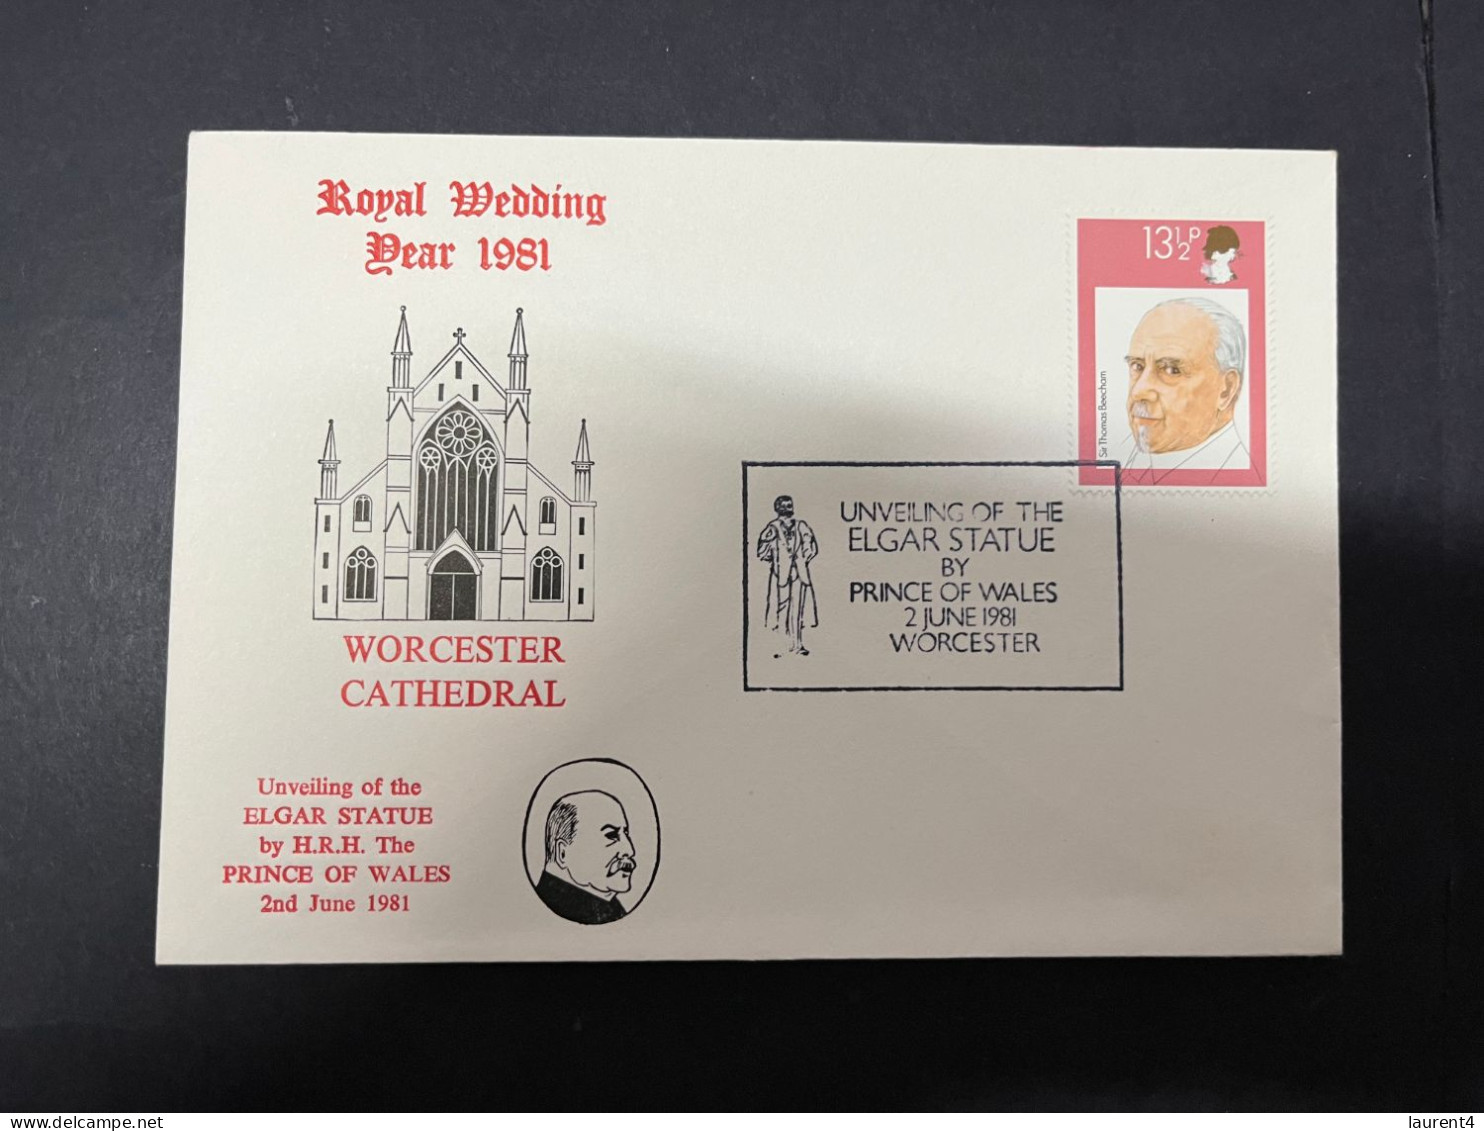 11-4-2024 (1 Z 39) 1 FDC - Royal Wedding Year - 1981 - Royal Visit To Worcester (Elgar Statue Unveilling) - Case Reali